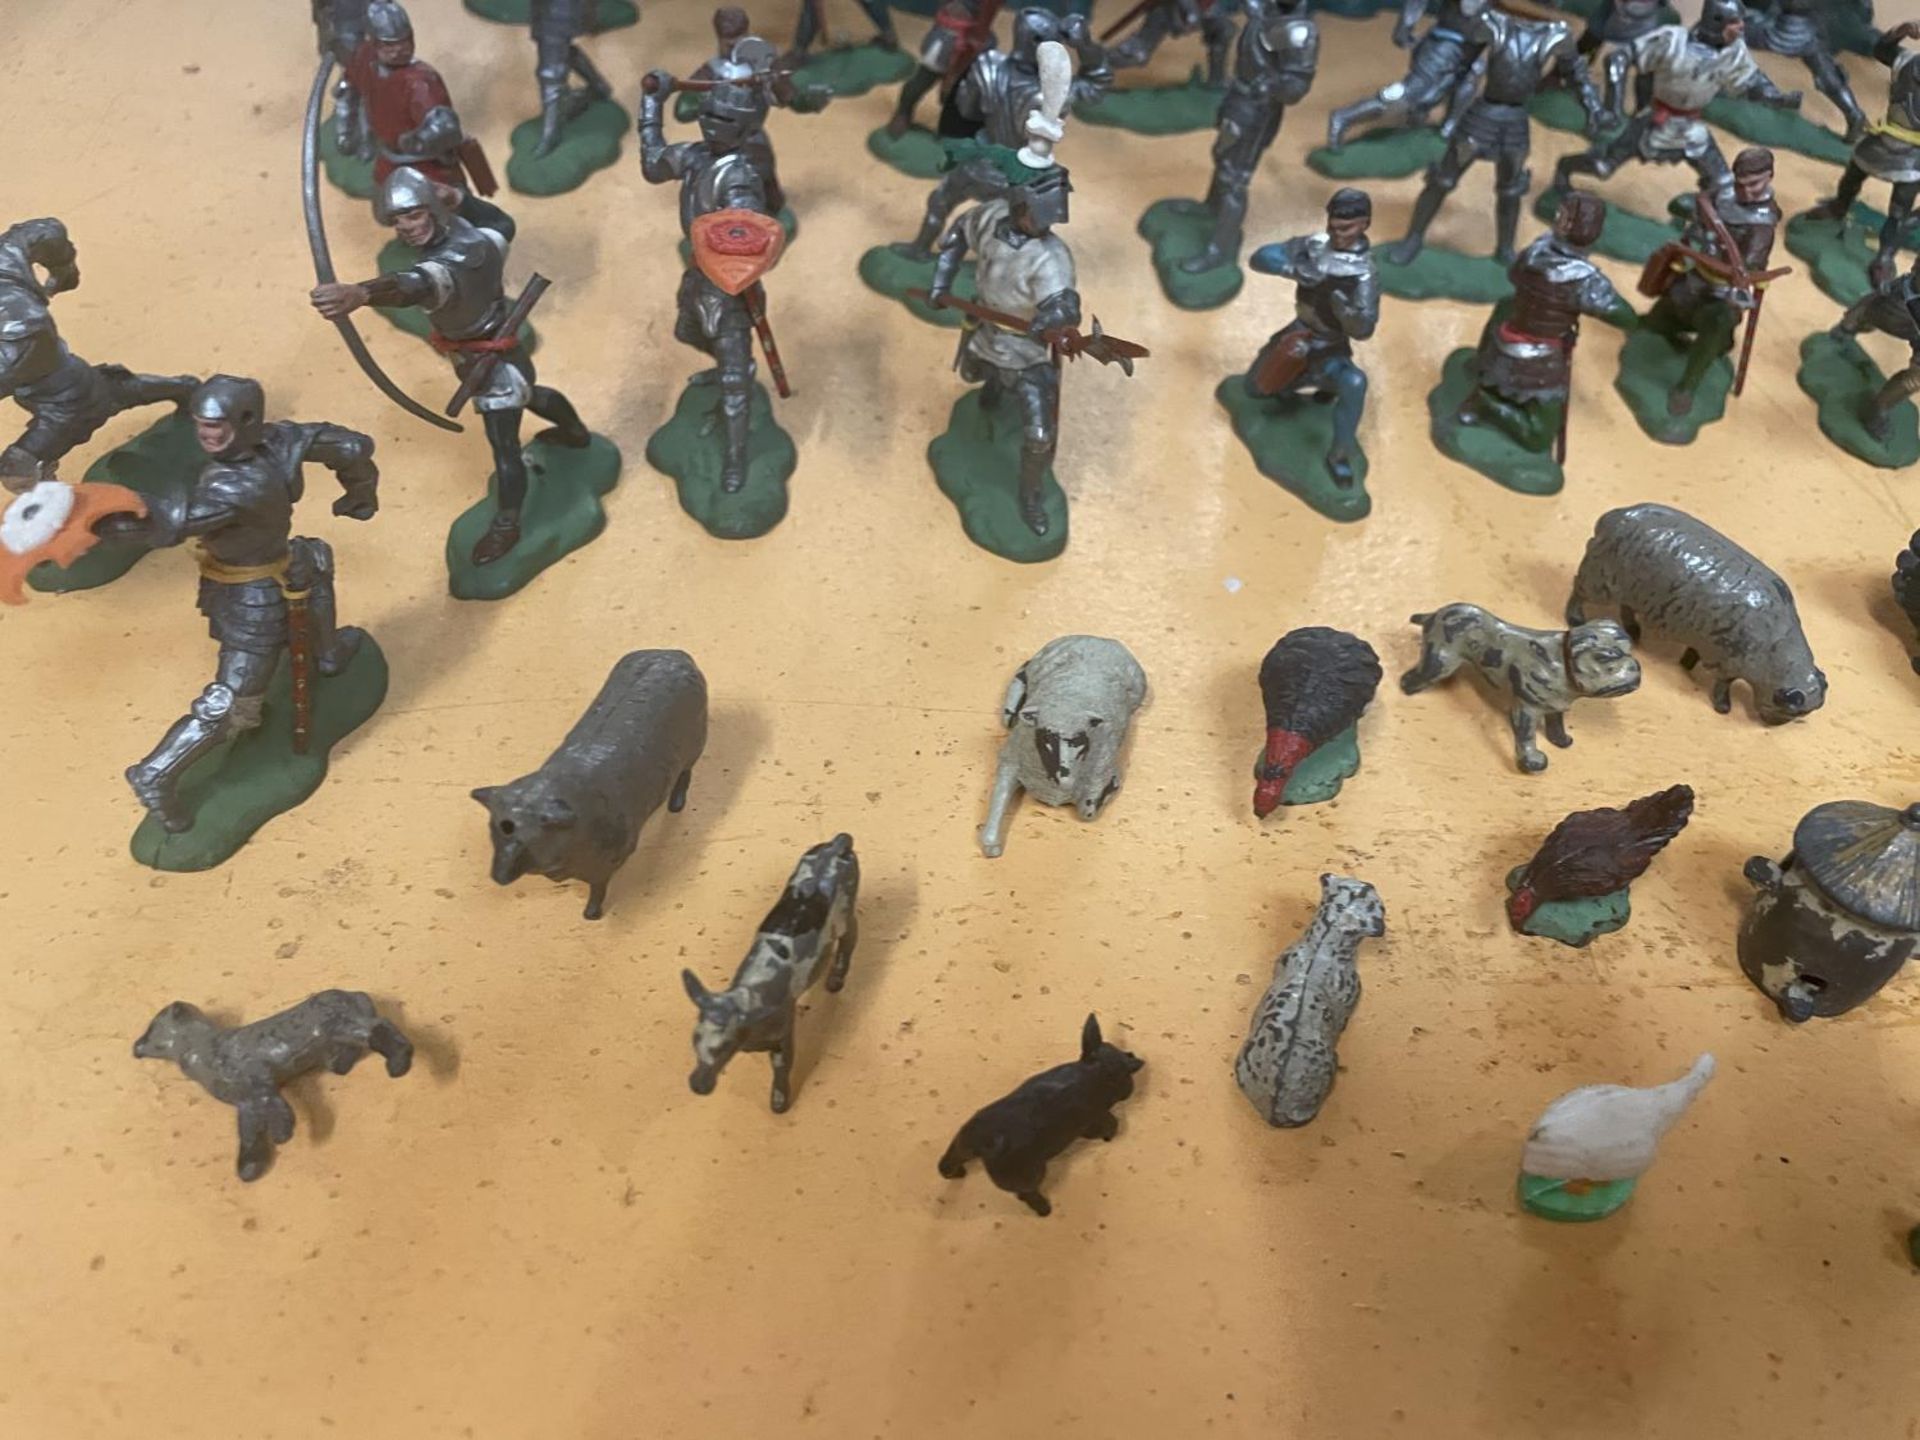 A LARGE QUANTITY OF SWOPPET BY BRITAINS PLASTIC 15TH CENTURY KNIGHT FIGURES AND A LARGE QUANTITY - Image 2 of 6